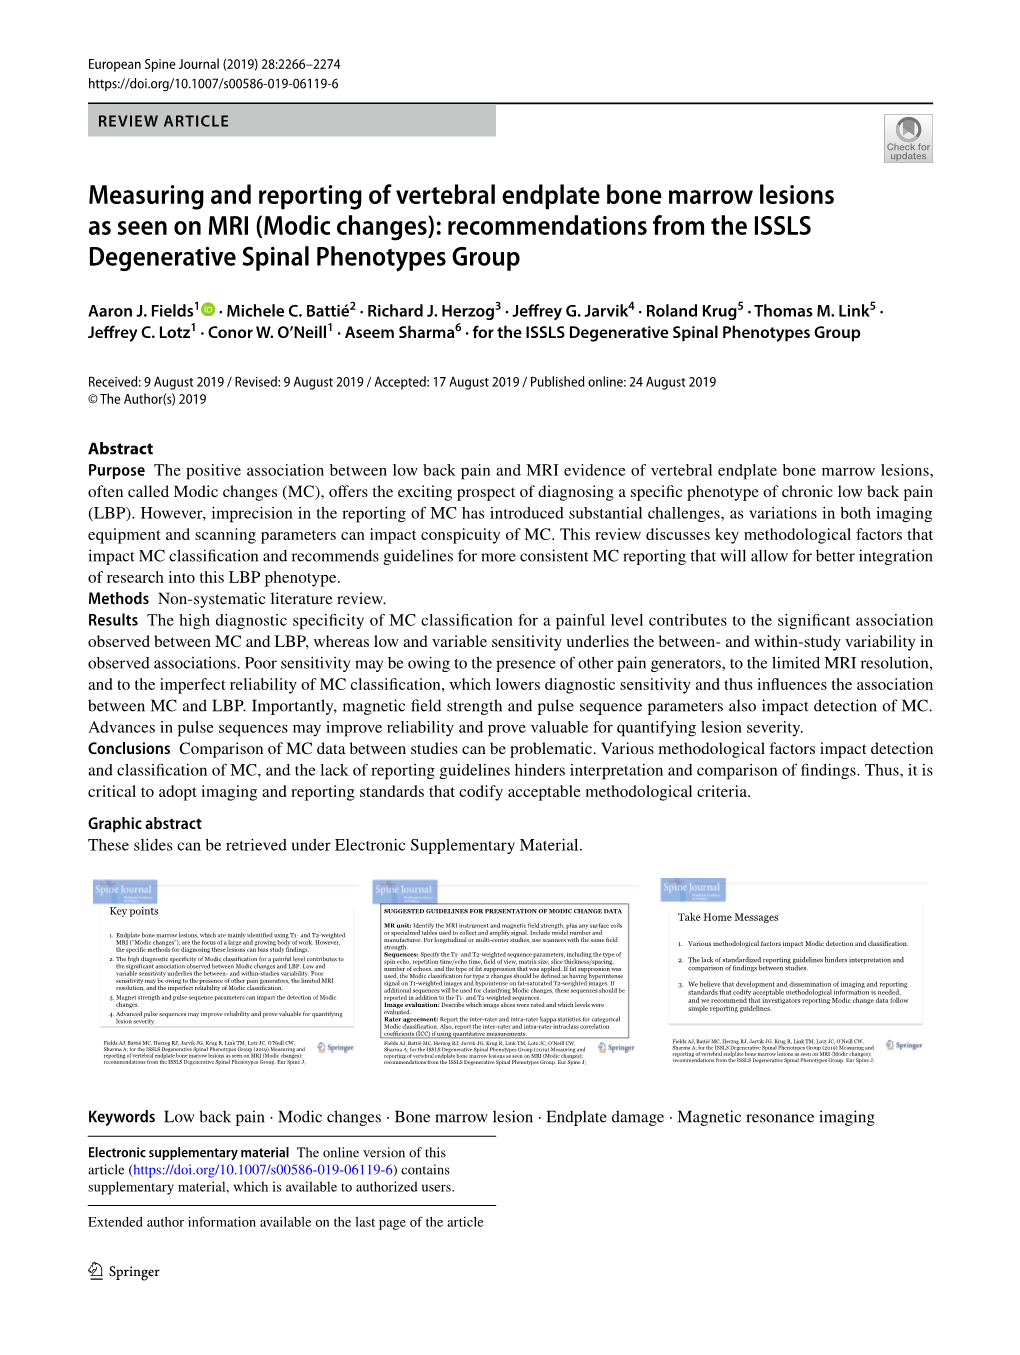 Measuring and Reporting of Vertebral Endplate Bone Marrow Lesions As Seen on MRI (Modic Changes): Recommendations from the ISSLS Degenerative Spinal Phenotypes Group